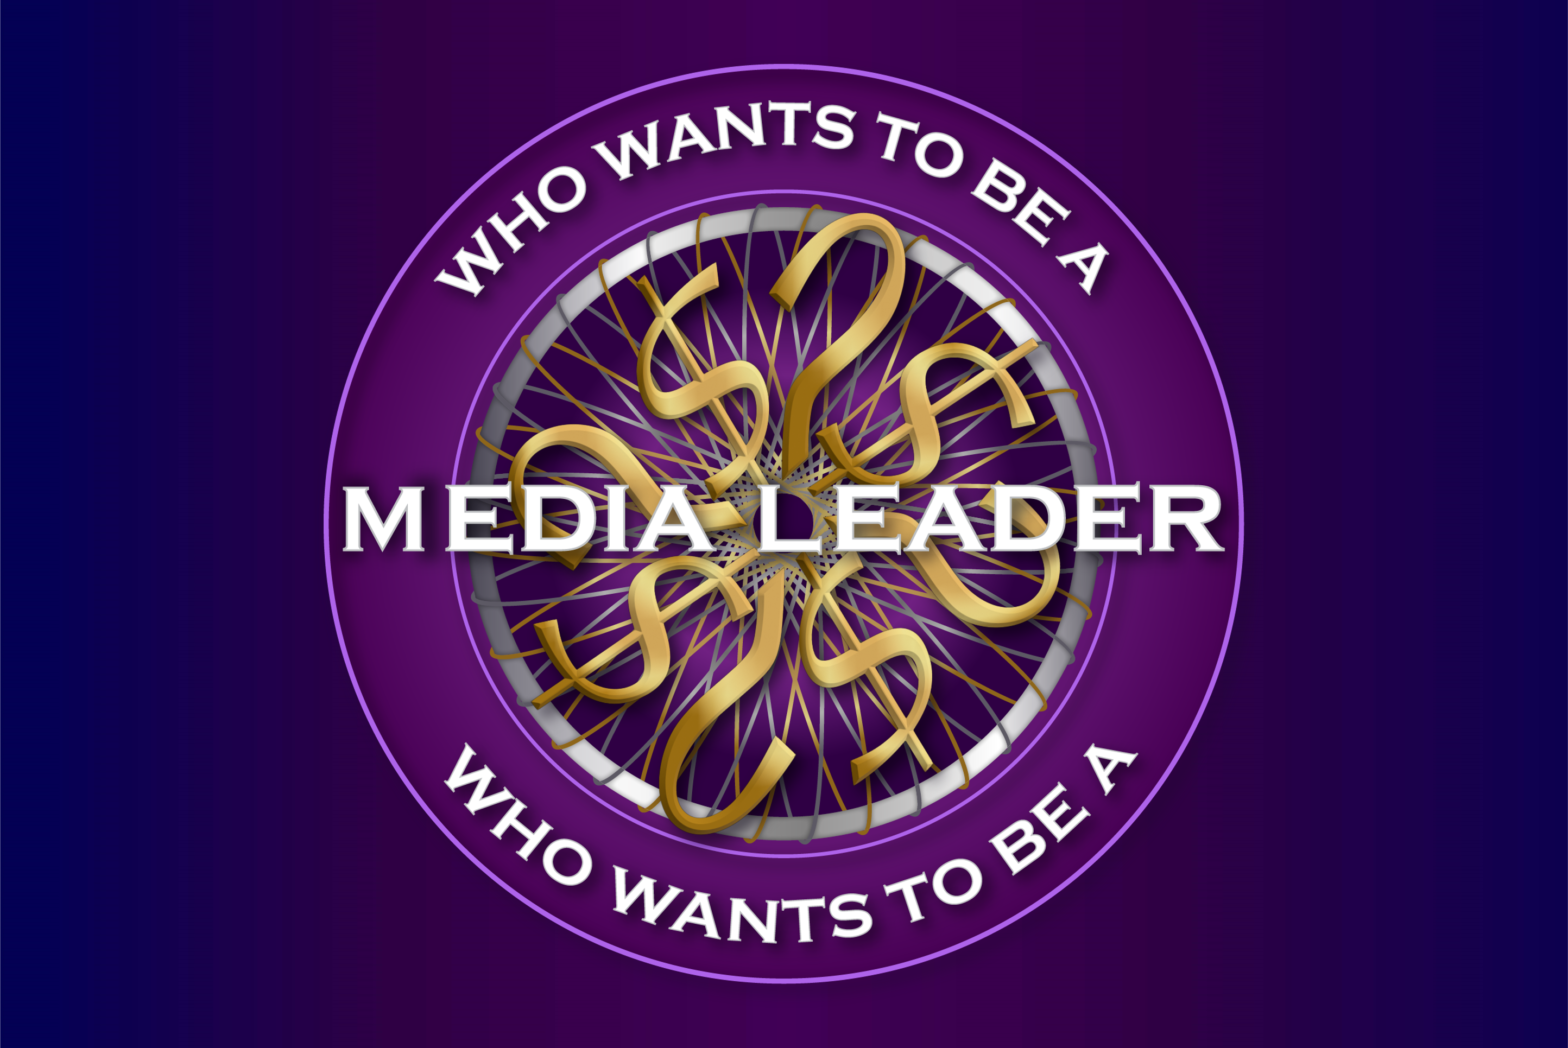 Watch the launch of ‘Who Wants to Be a Media Leader?’